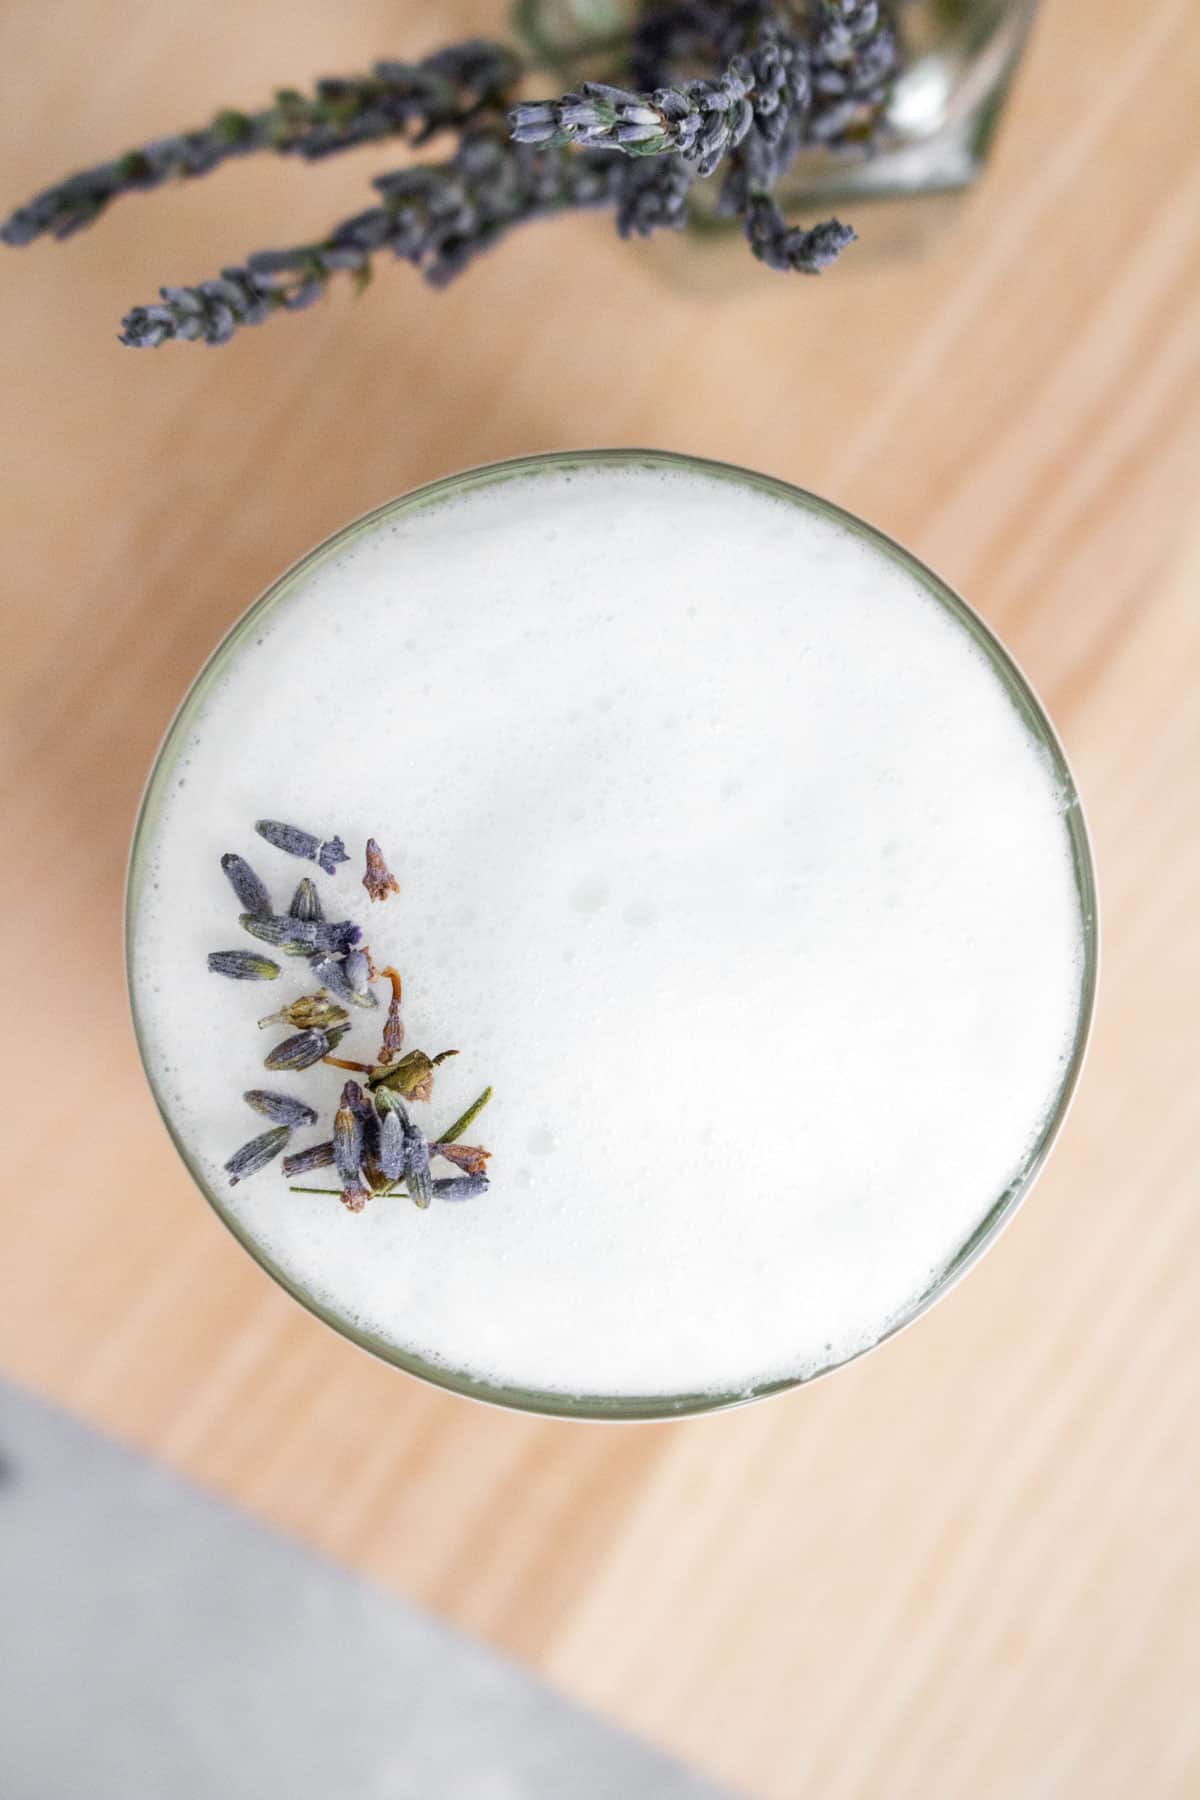 Overhead view of a glass of lavender london fog with lavender buds on top.